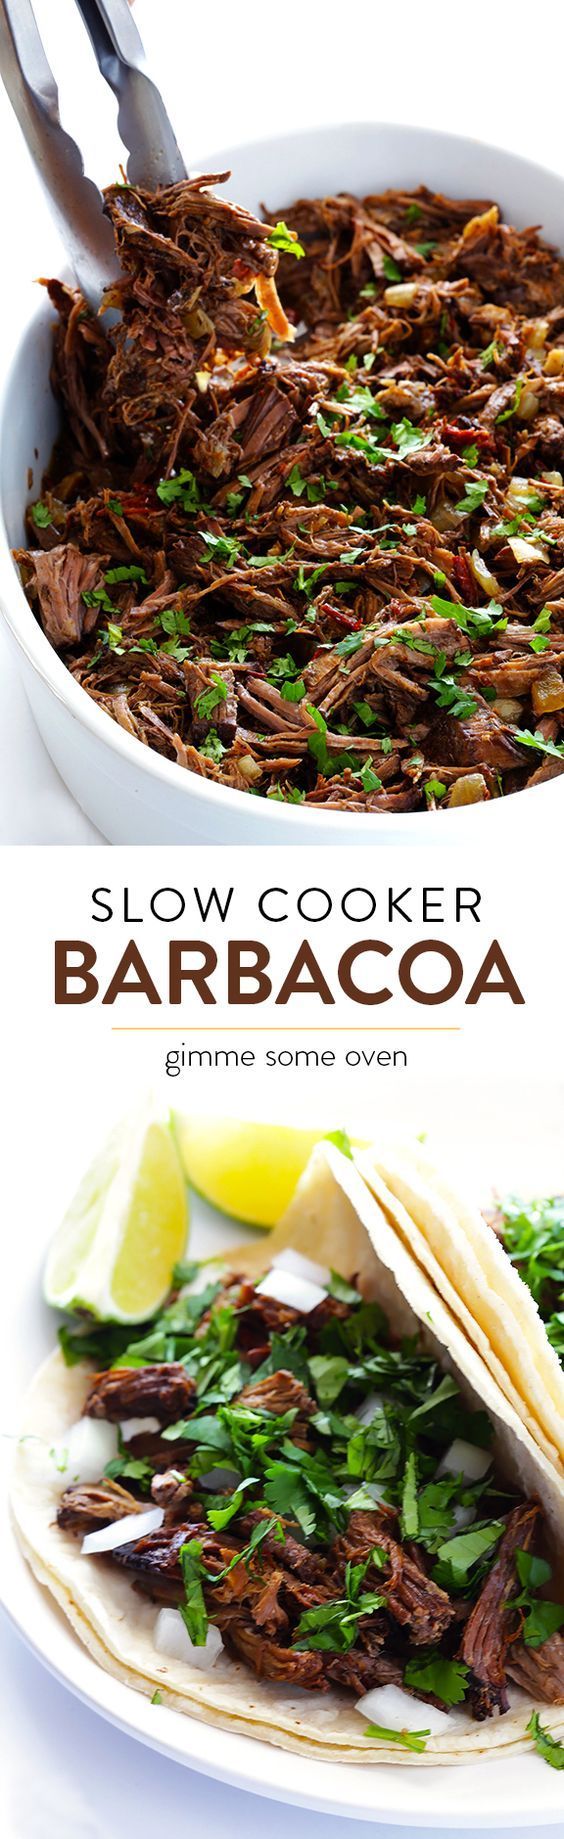 Learn how to make delicious barbacoa beef in the slow cooker!  Perfect for tacos, burritos, salads, and more! | gimmesomeoven.com